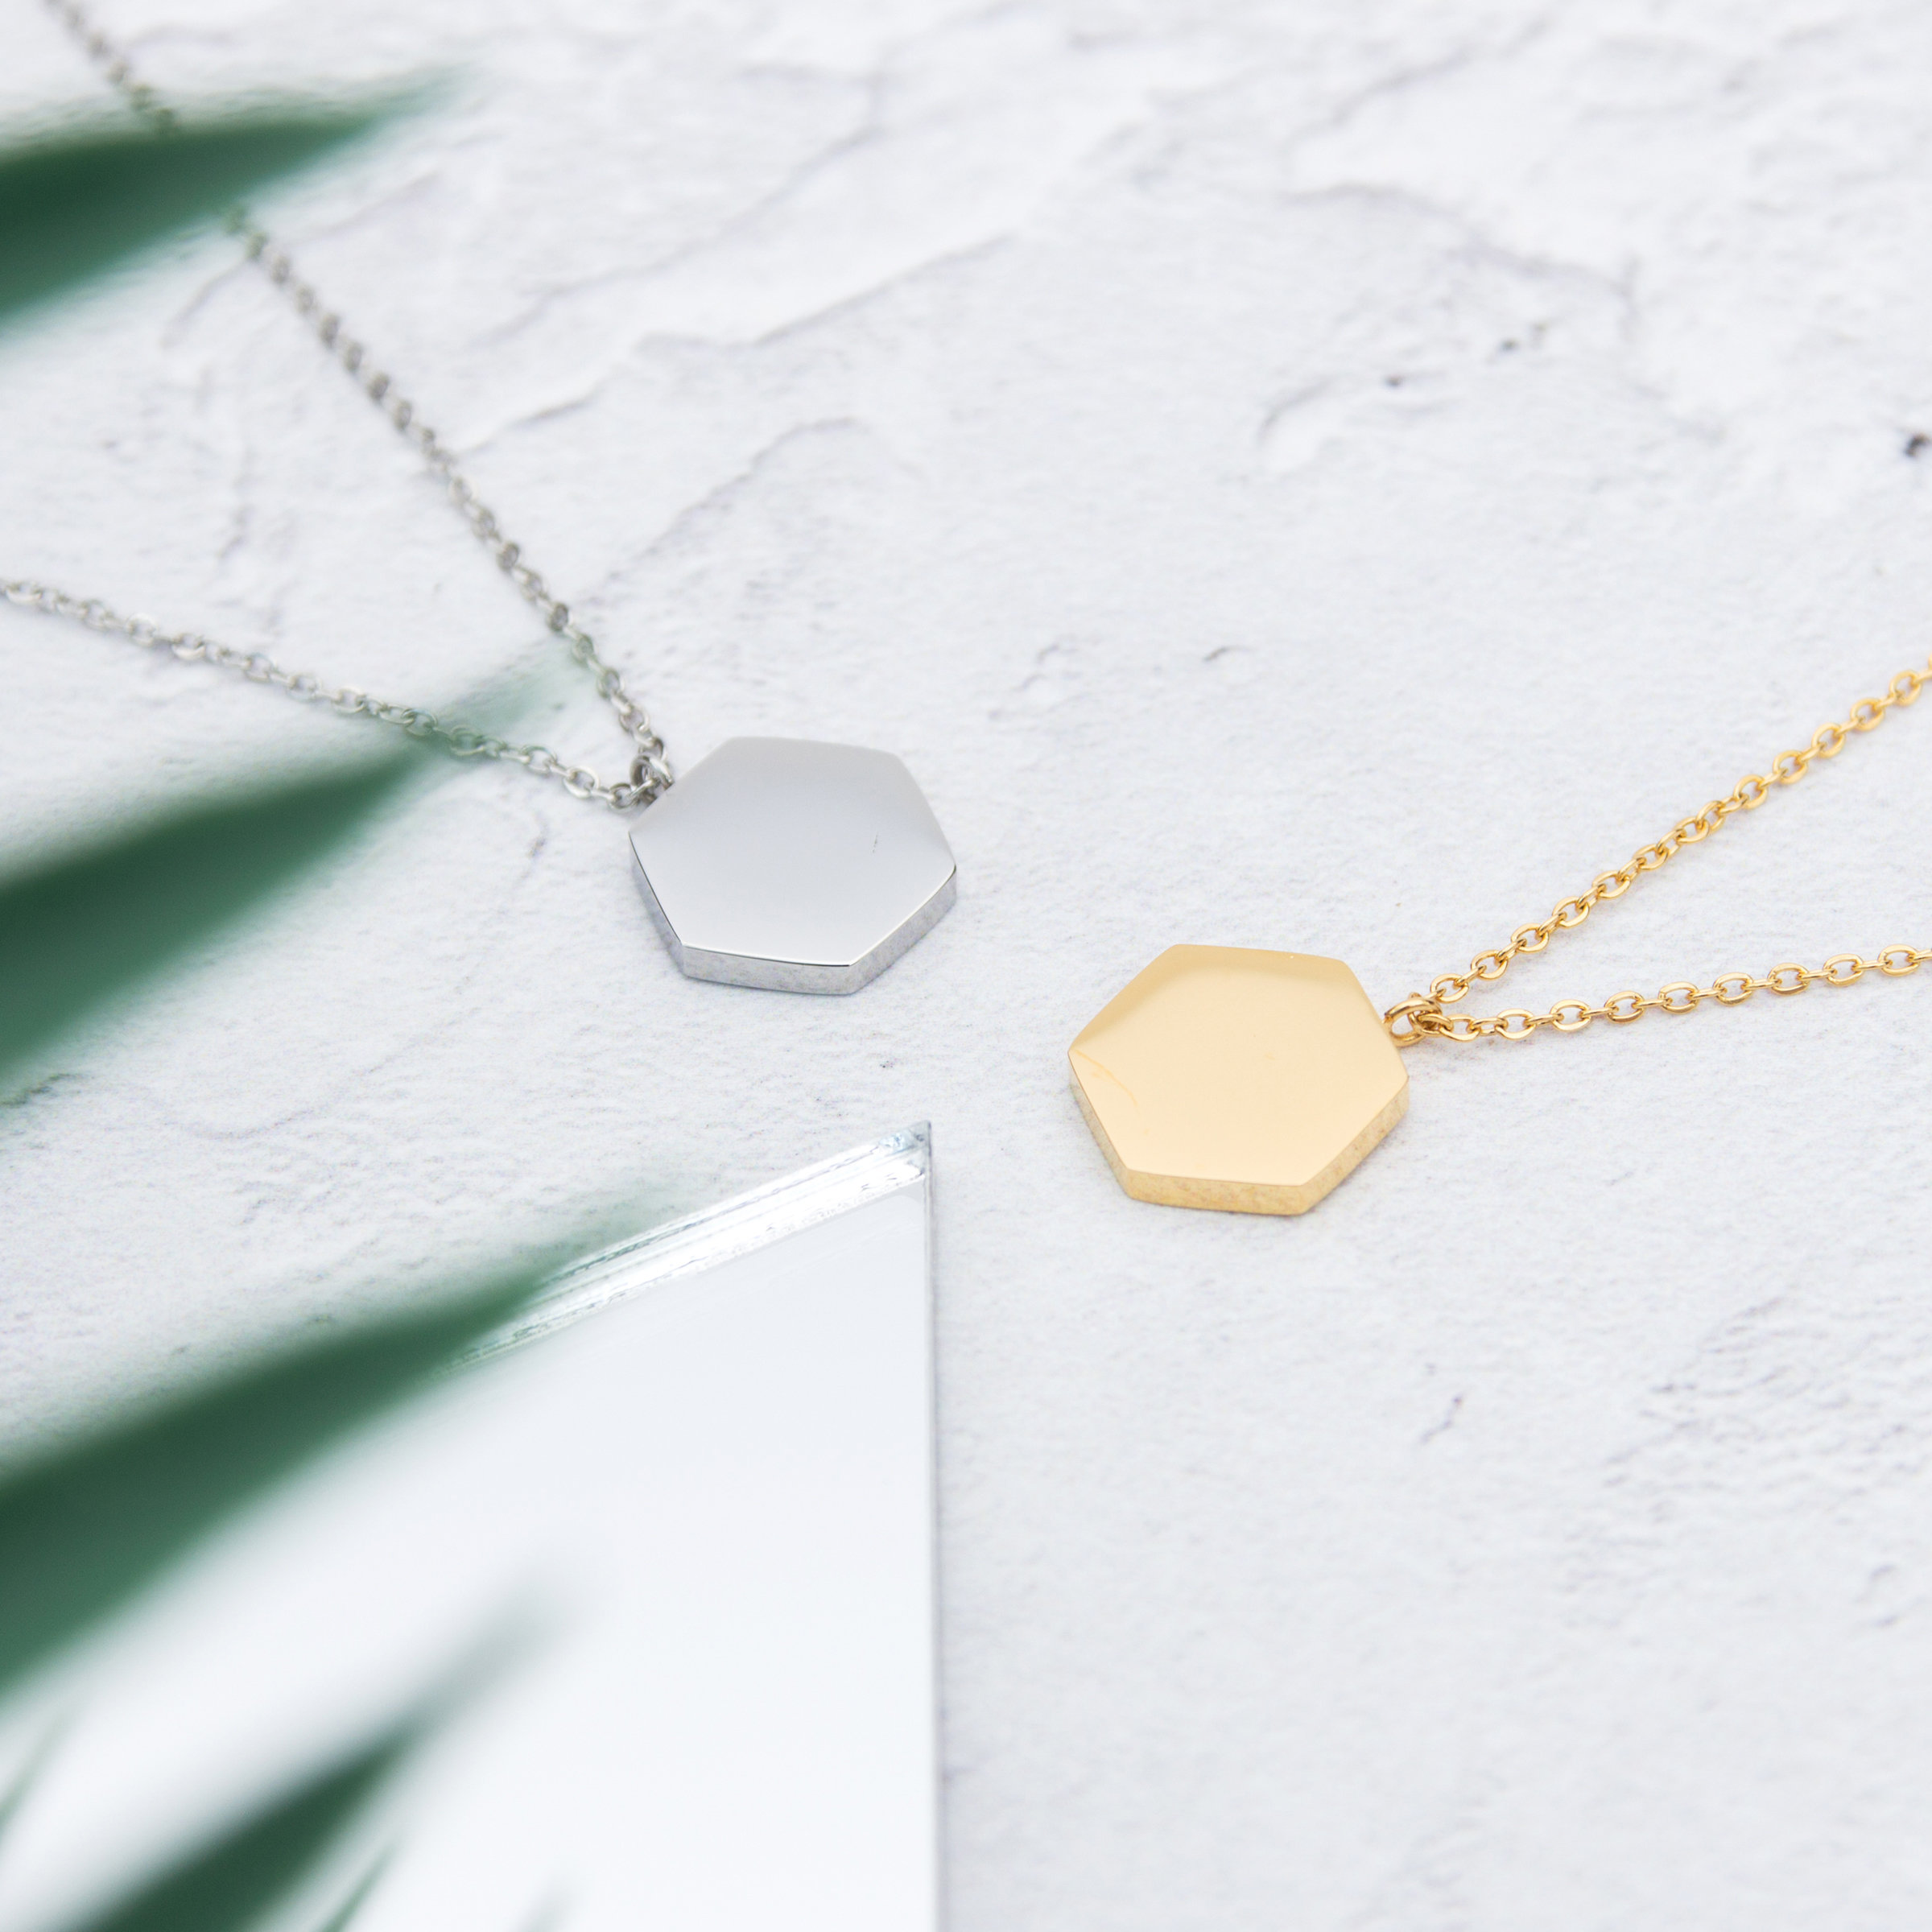 Kuku gold and silver hexagon necklaces